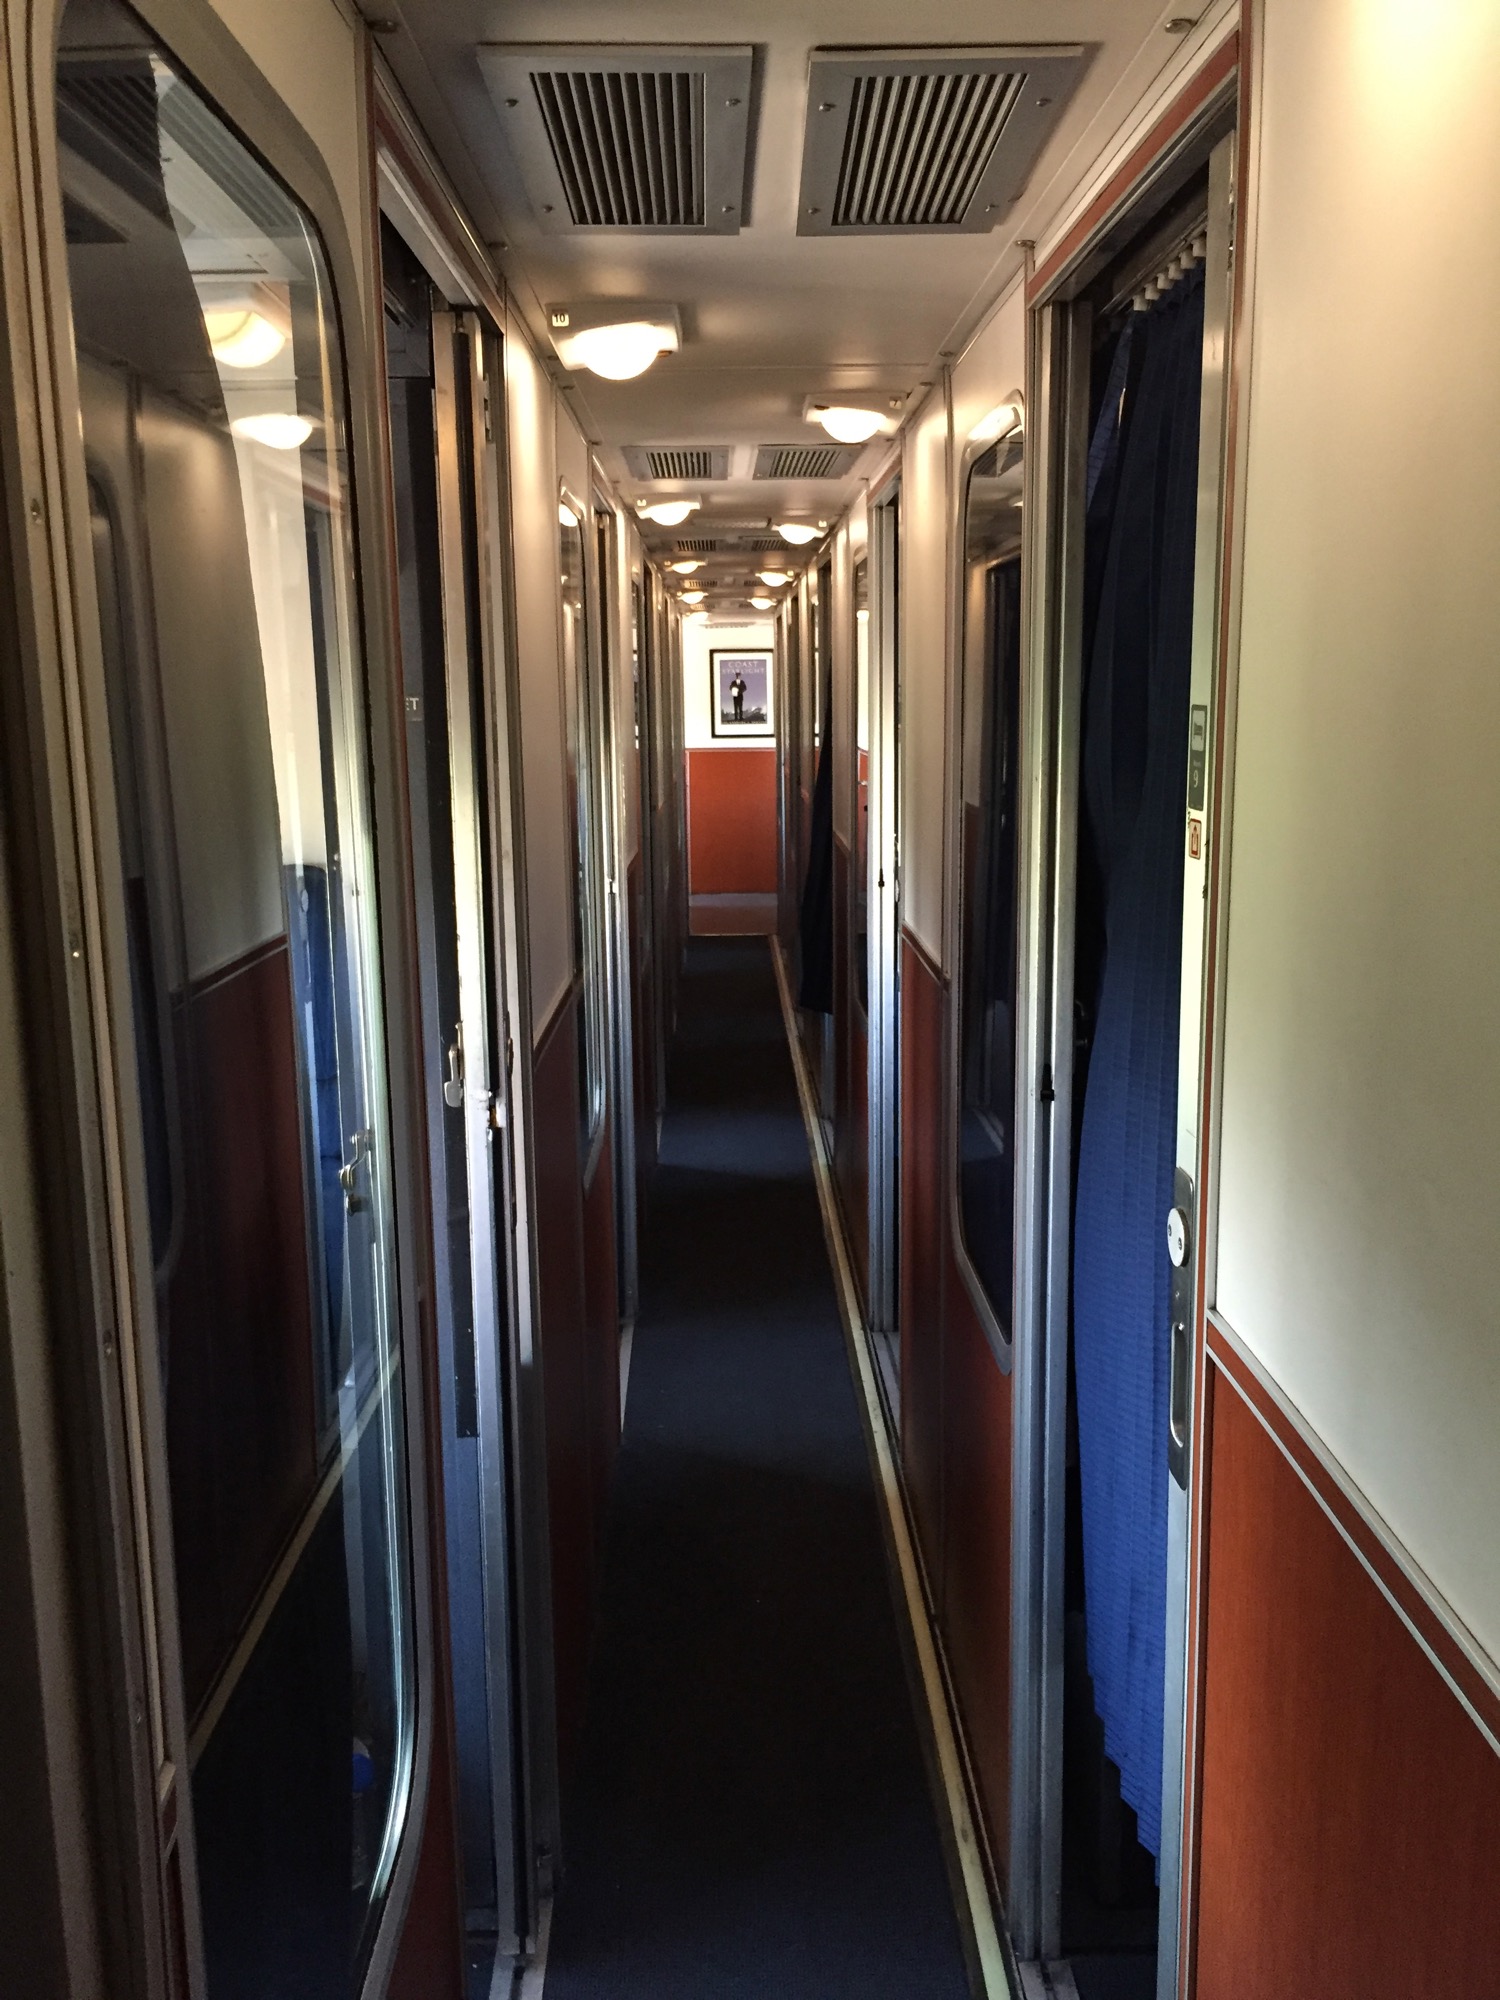 a long hallway with doors and windows